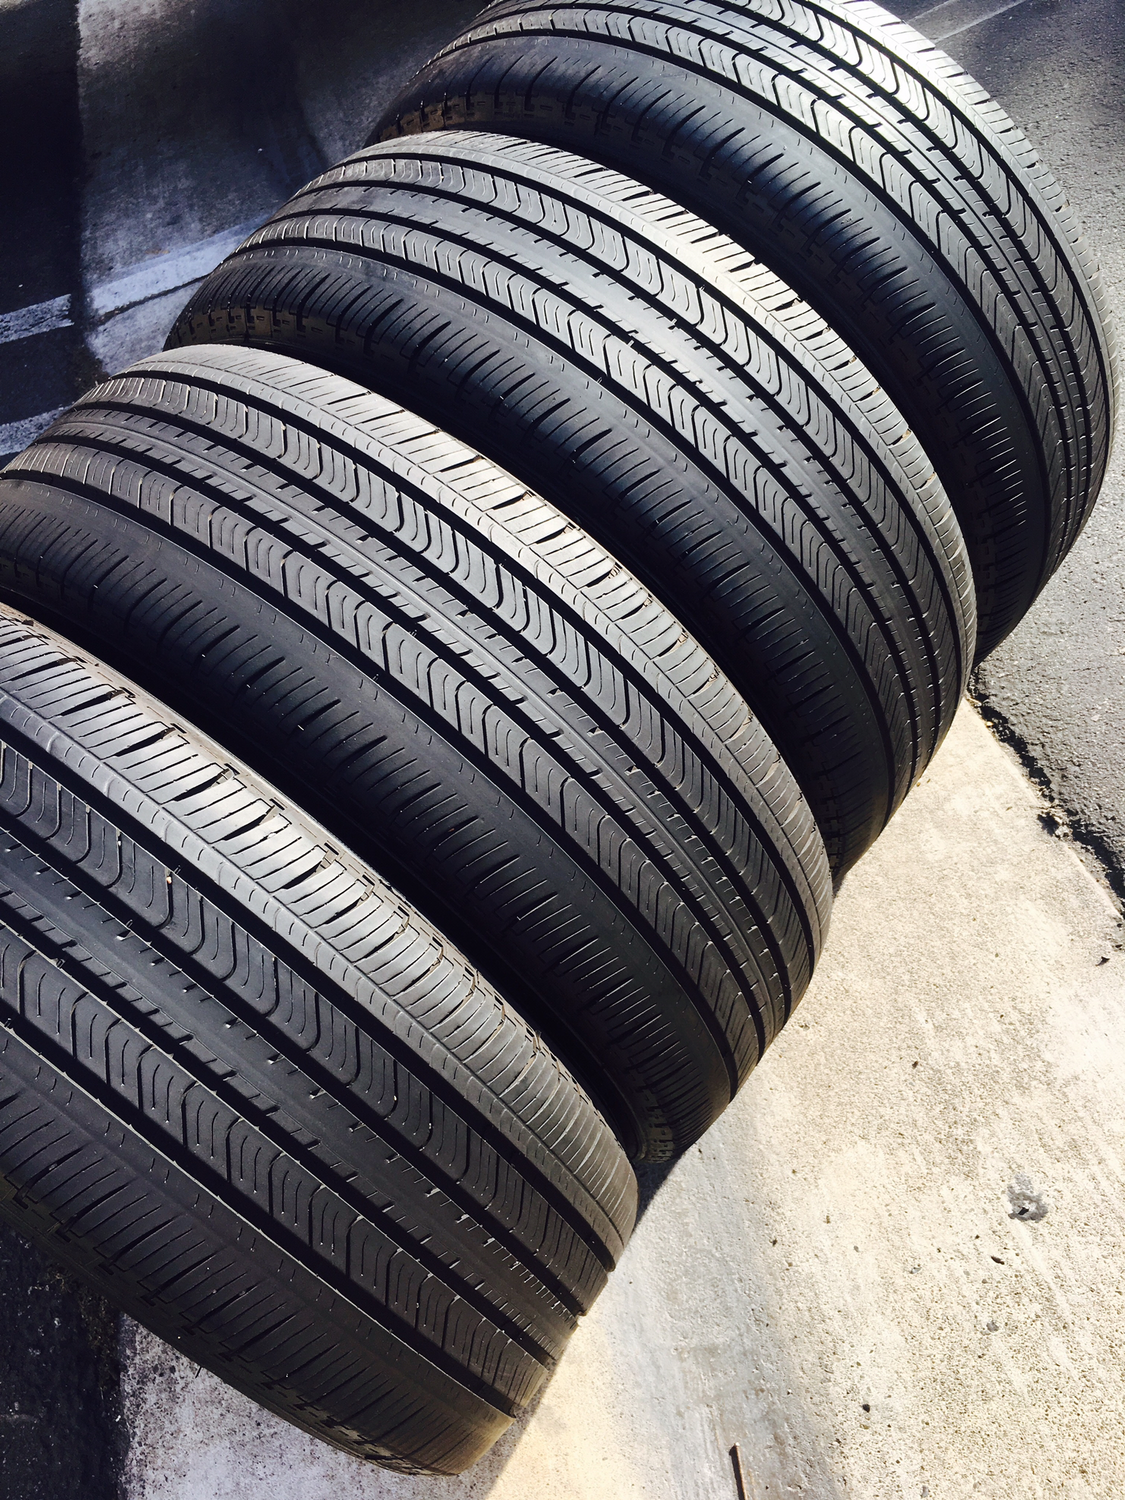 4 USED TIRES 215/55r17 Michelin PRIMACY MXV4 WITH 7/32